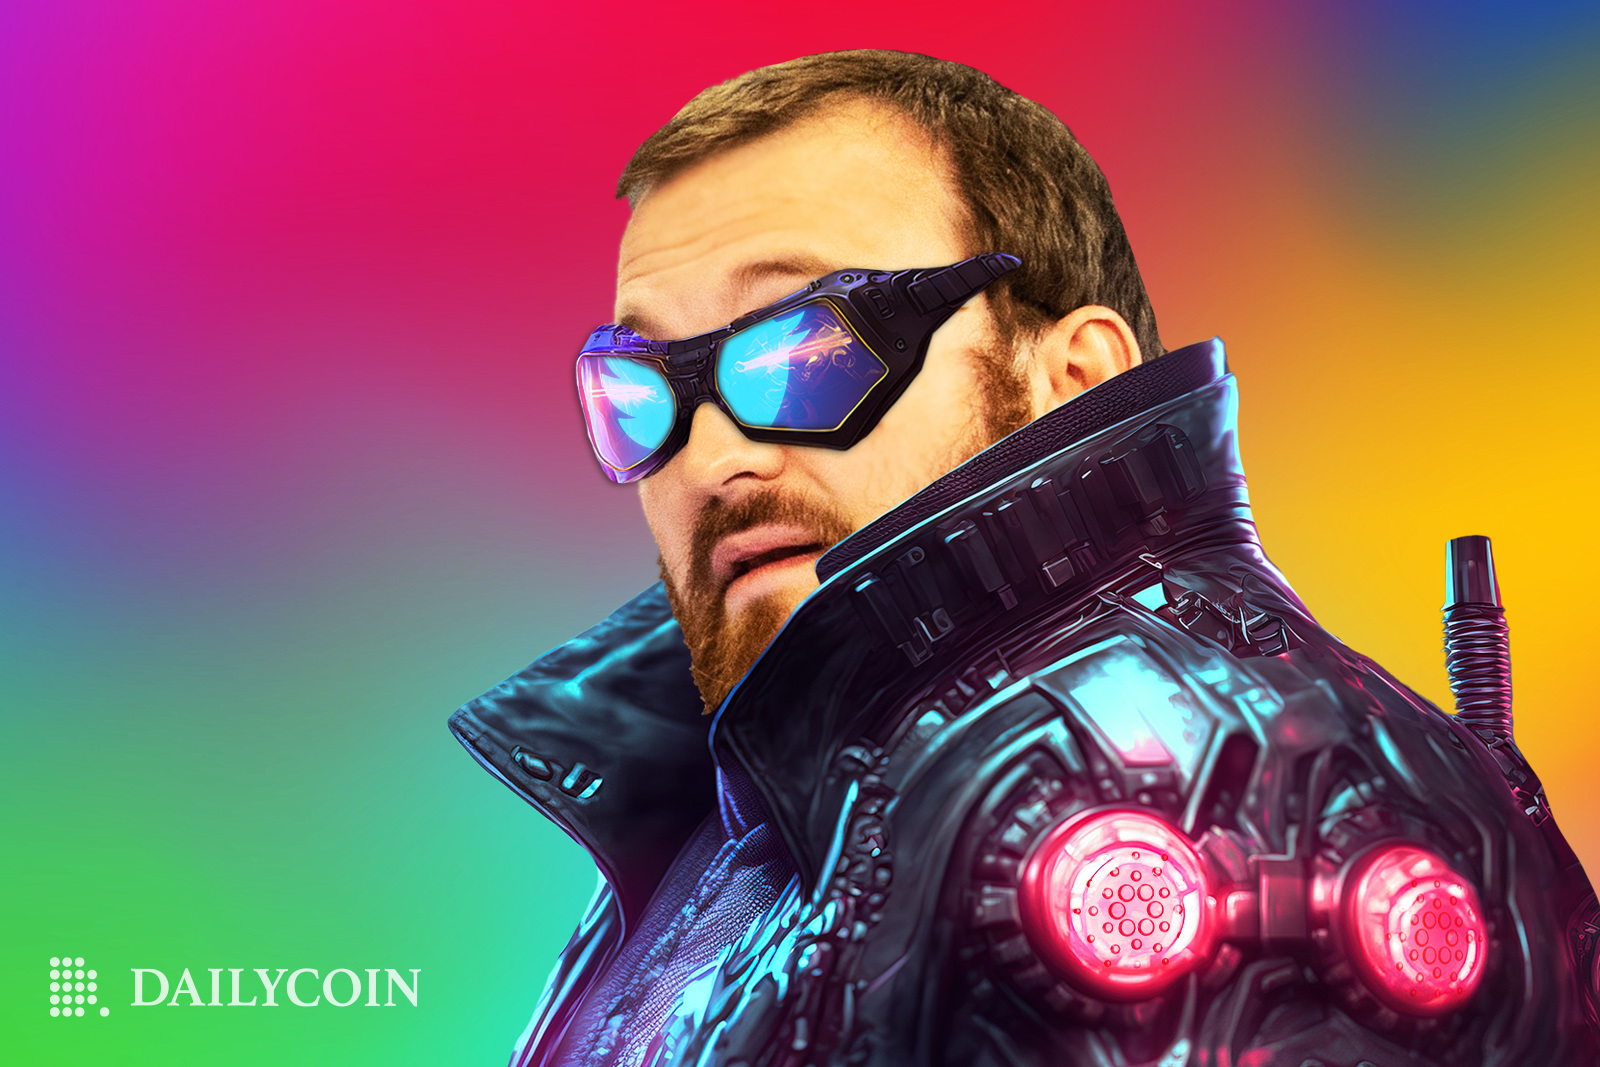 Cardano (ADA) Charles Hoskinson in a steampunk biker suit and goggles